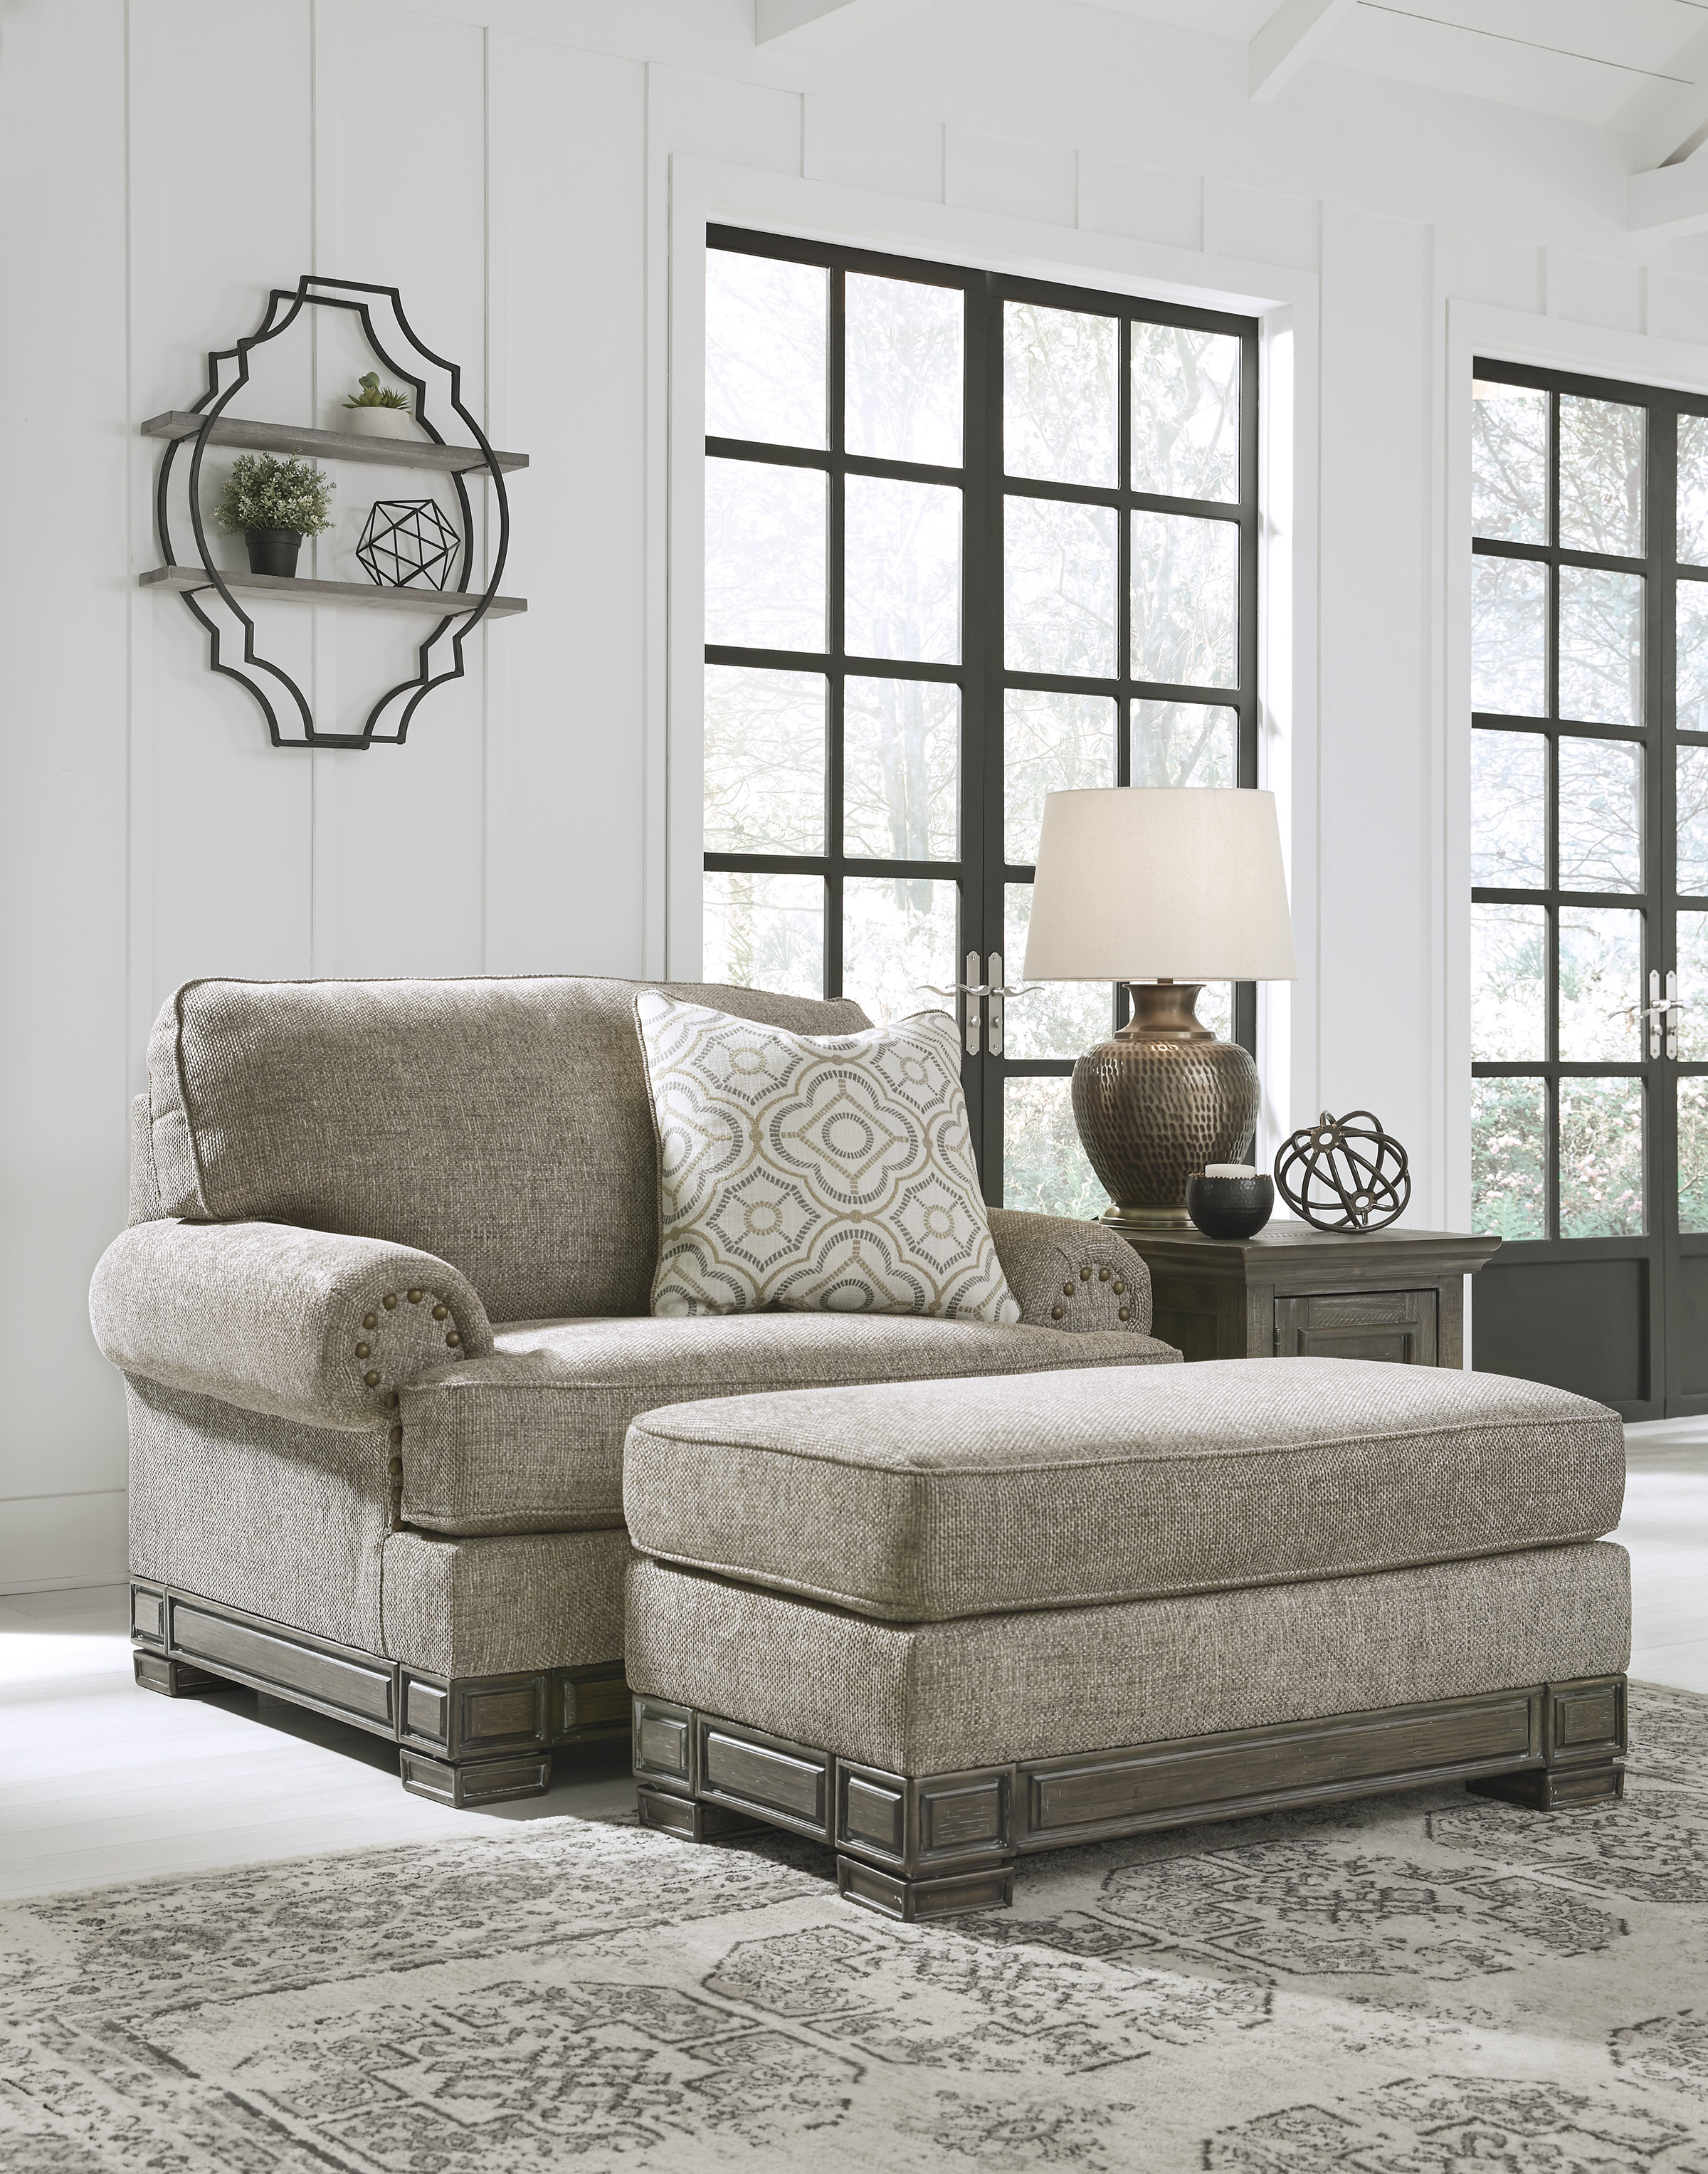 Dash Square Furniture's Exclusive Collection for Mother’s Day